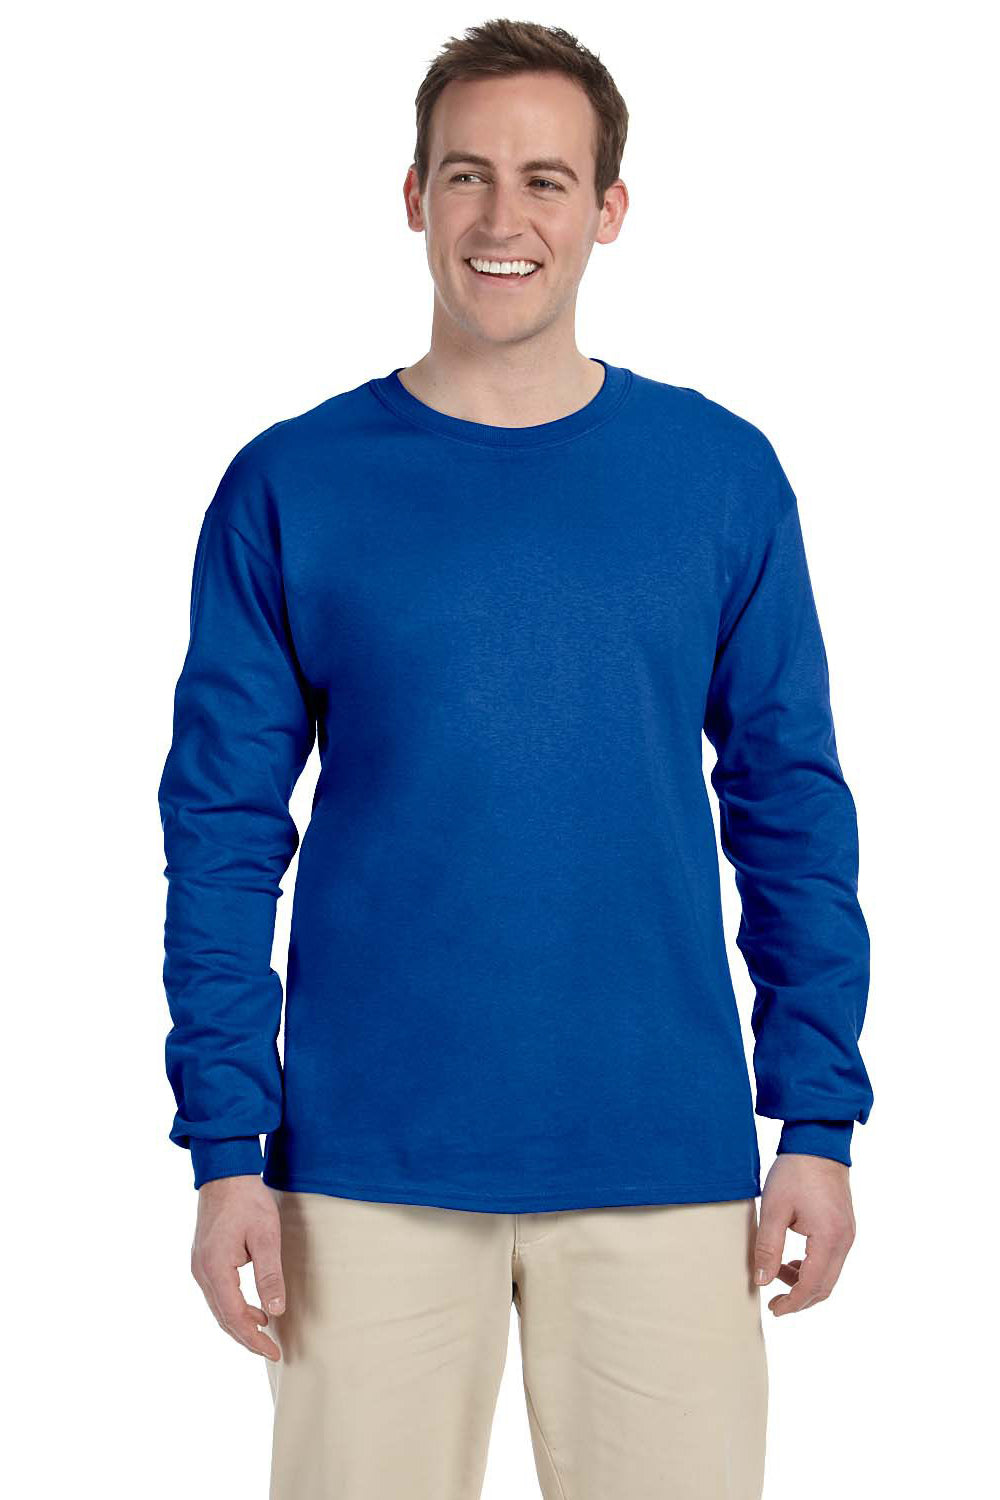 Fruit Of The Loom 4930 Mens HD Jersey Long Sleeve Crewneck T-Shirt Royal Blue Front